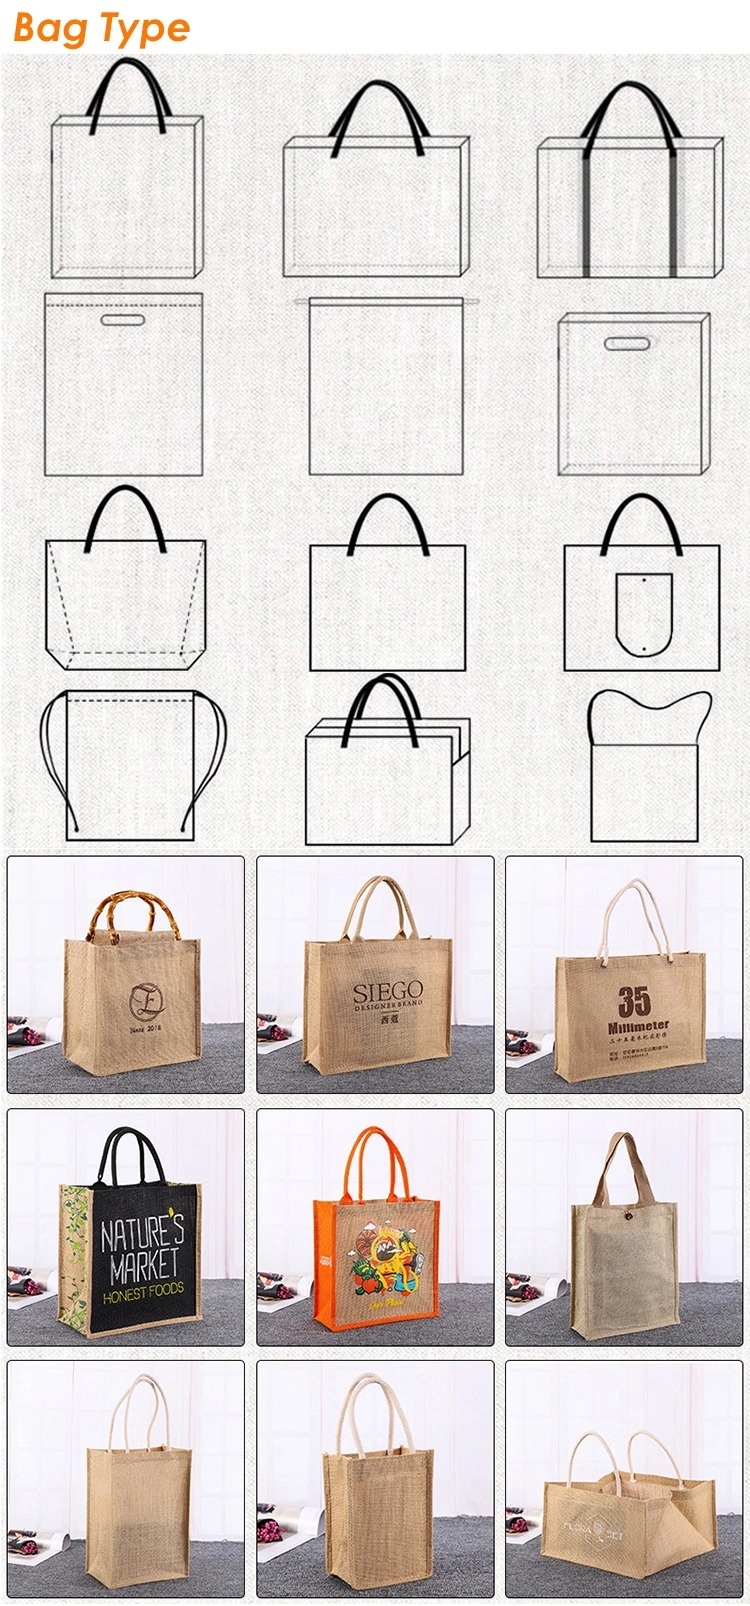 Custom Logo Natural Burlap Eco-Friendly Recycled Canvas Non-Woven Tote Bags Reusable Grocery Jute Shopping Bag